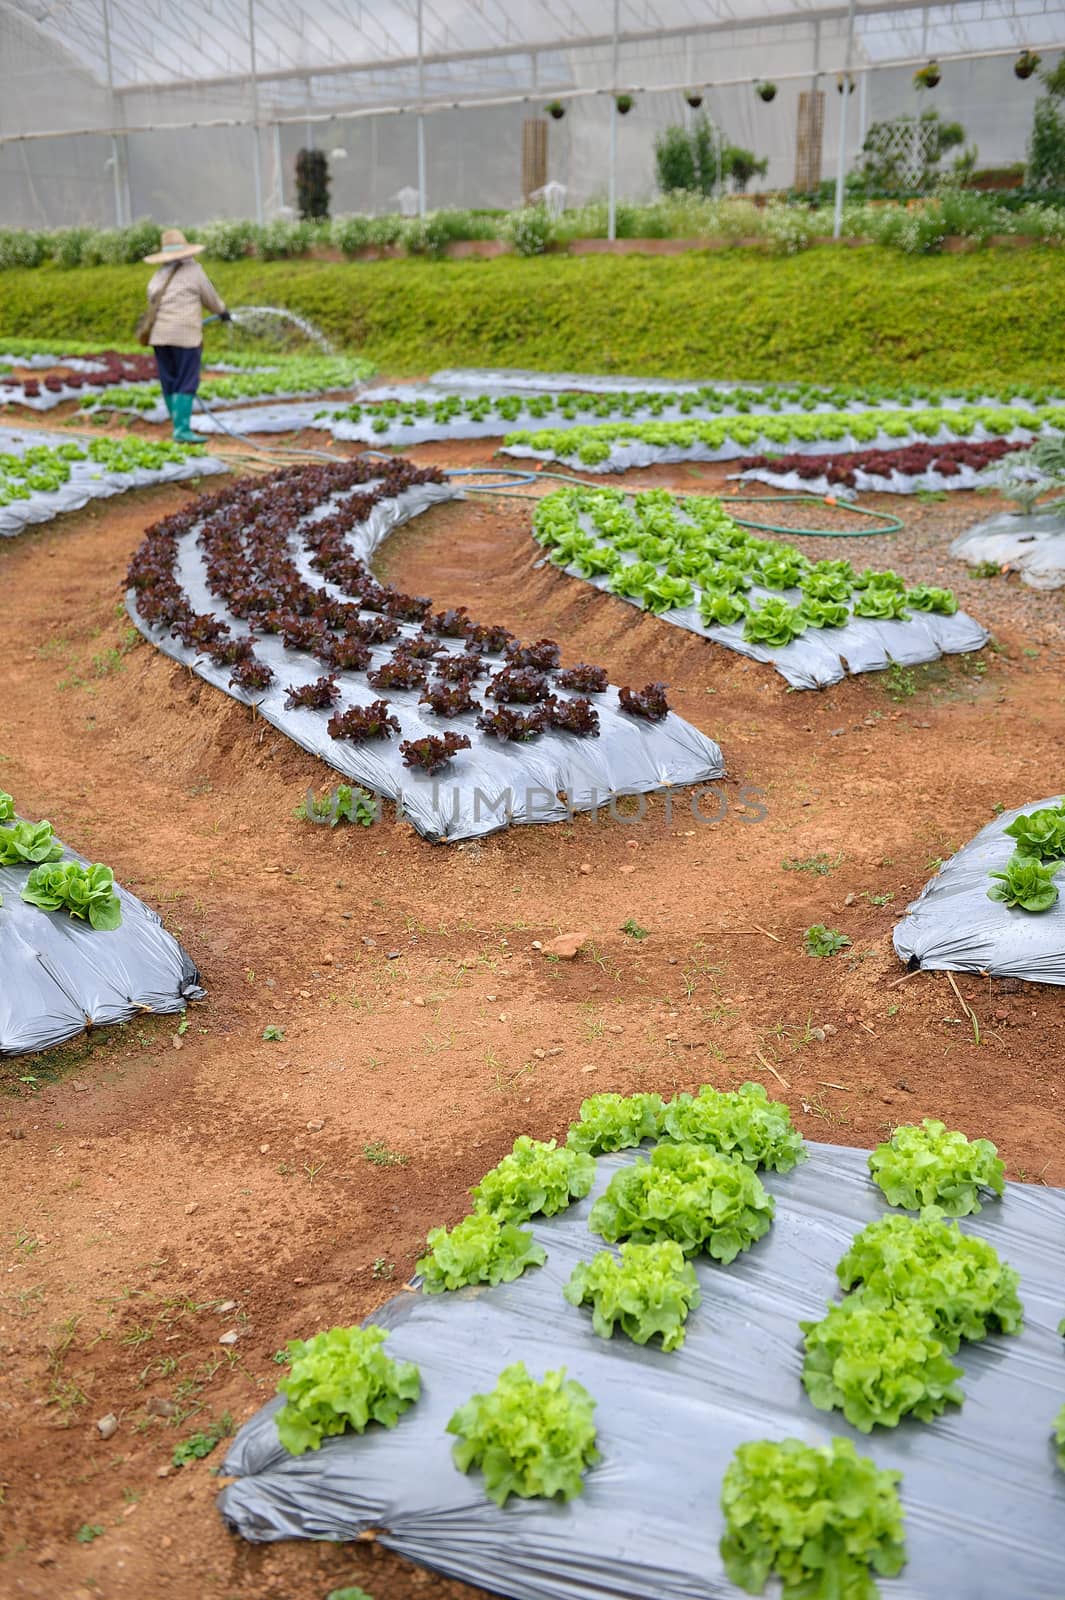 worker in veggie plot at Doi Angkhang royal project, Chiangmai, by think4photop